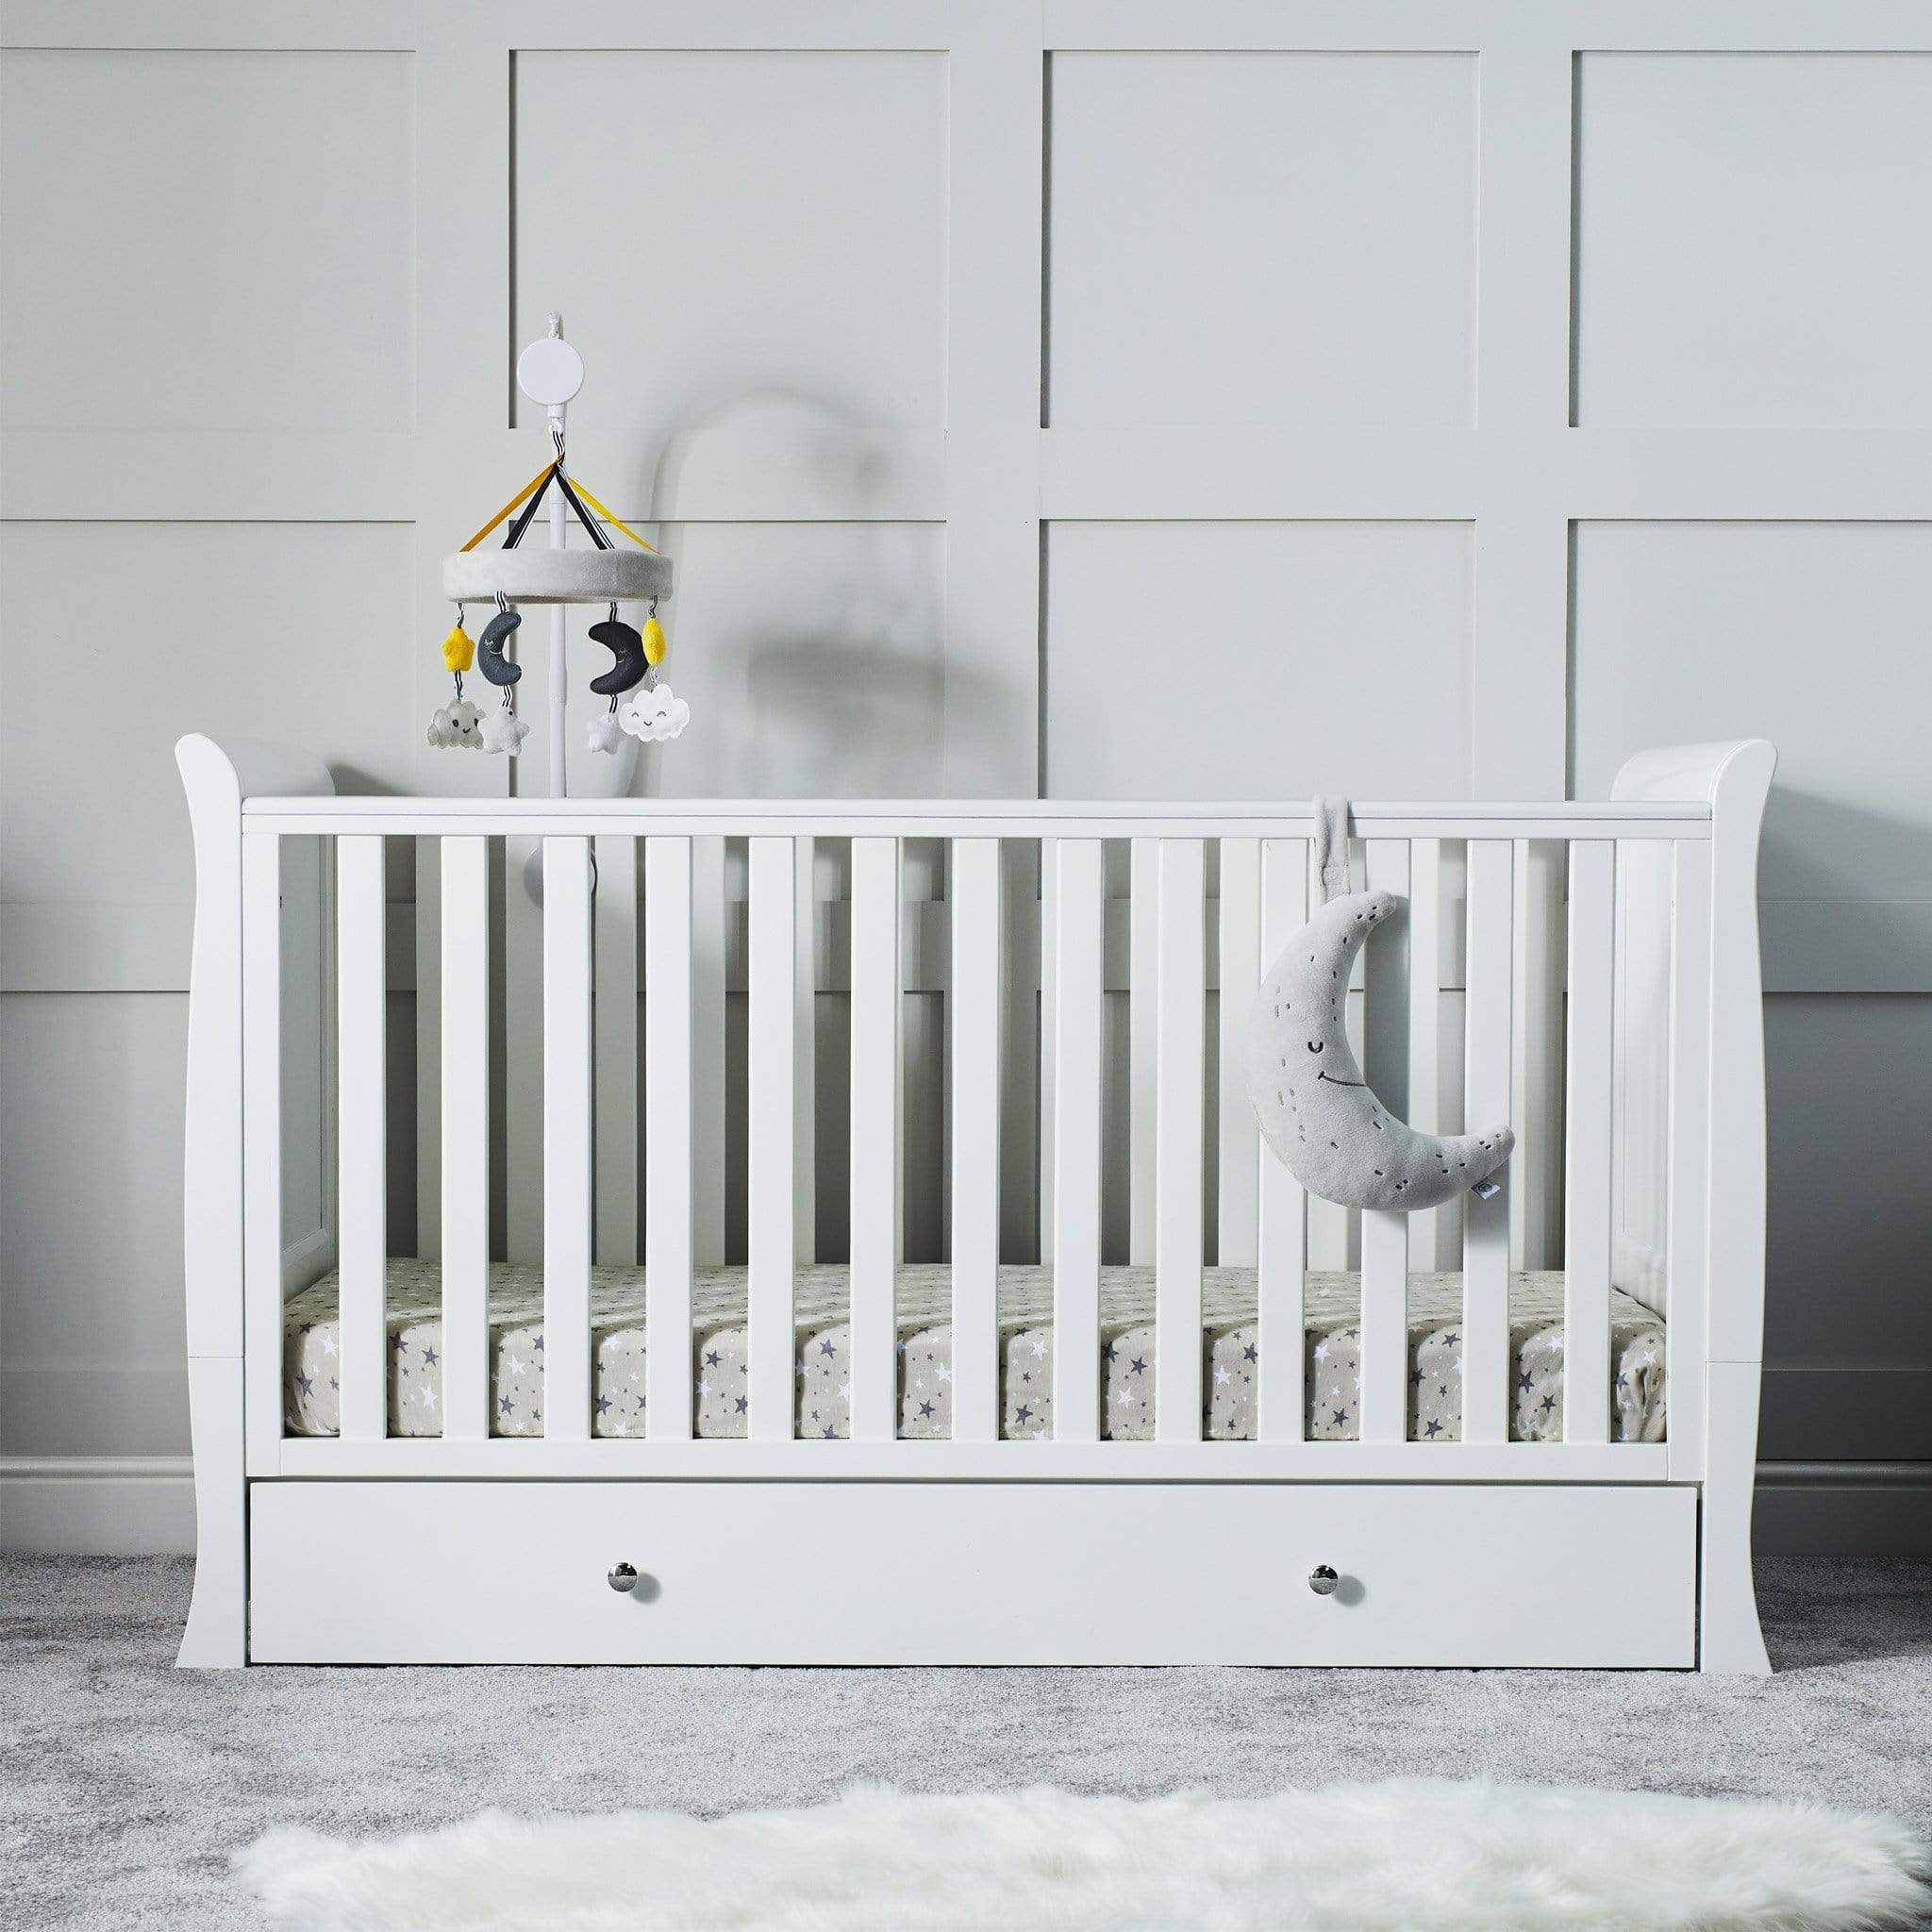 Ickle Bubba Snowdon Classic Cot Bed - White Cot Beds